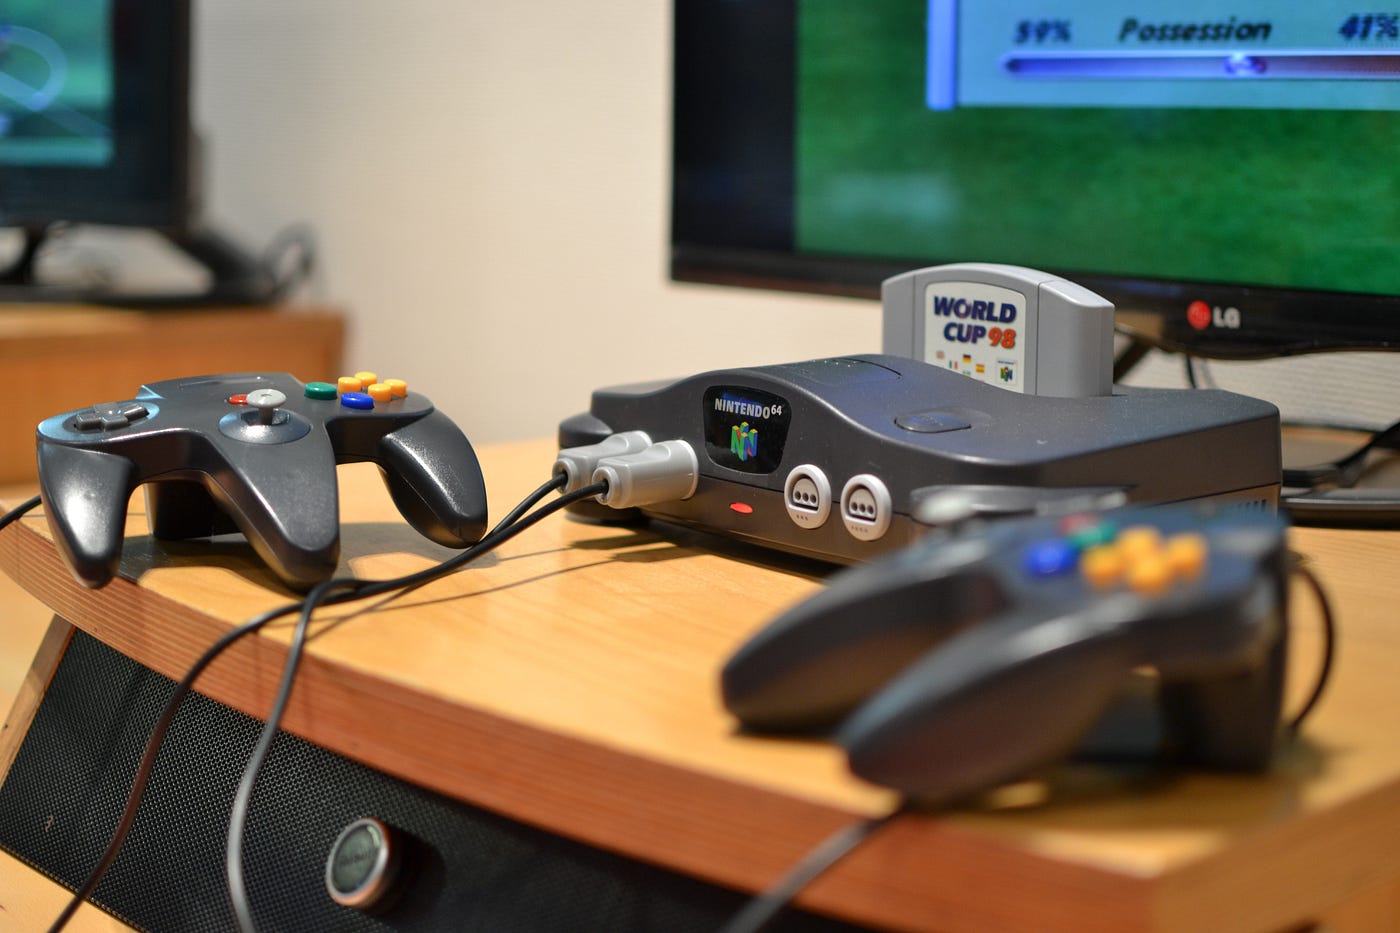 RUMOR: Switch Online N64 app might connect to Game Boy games